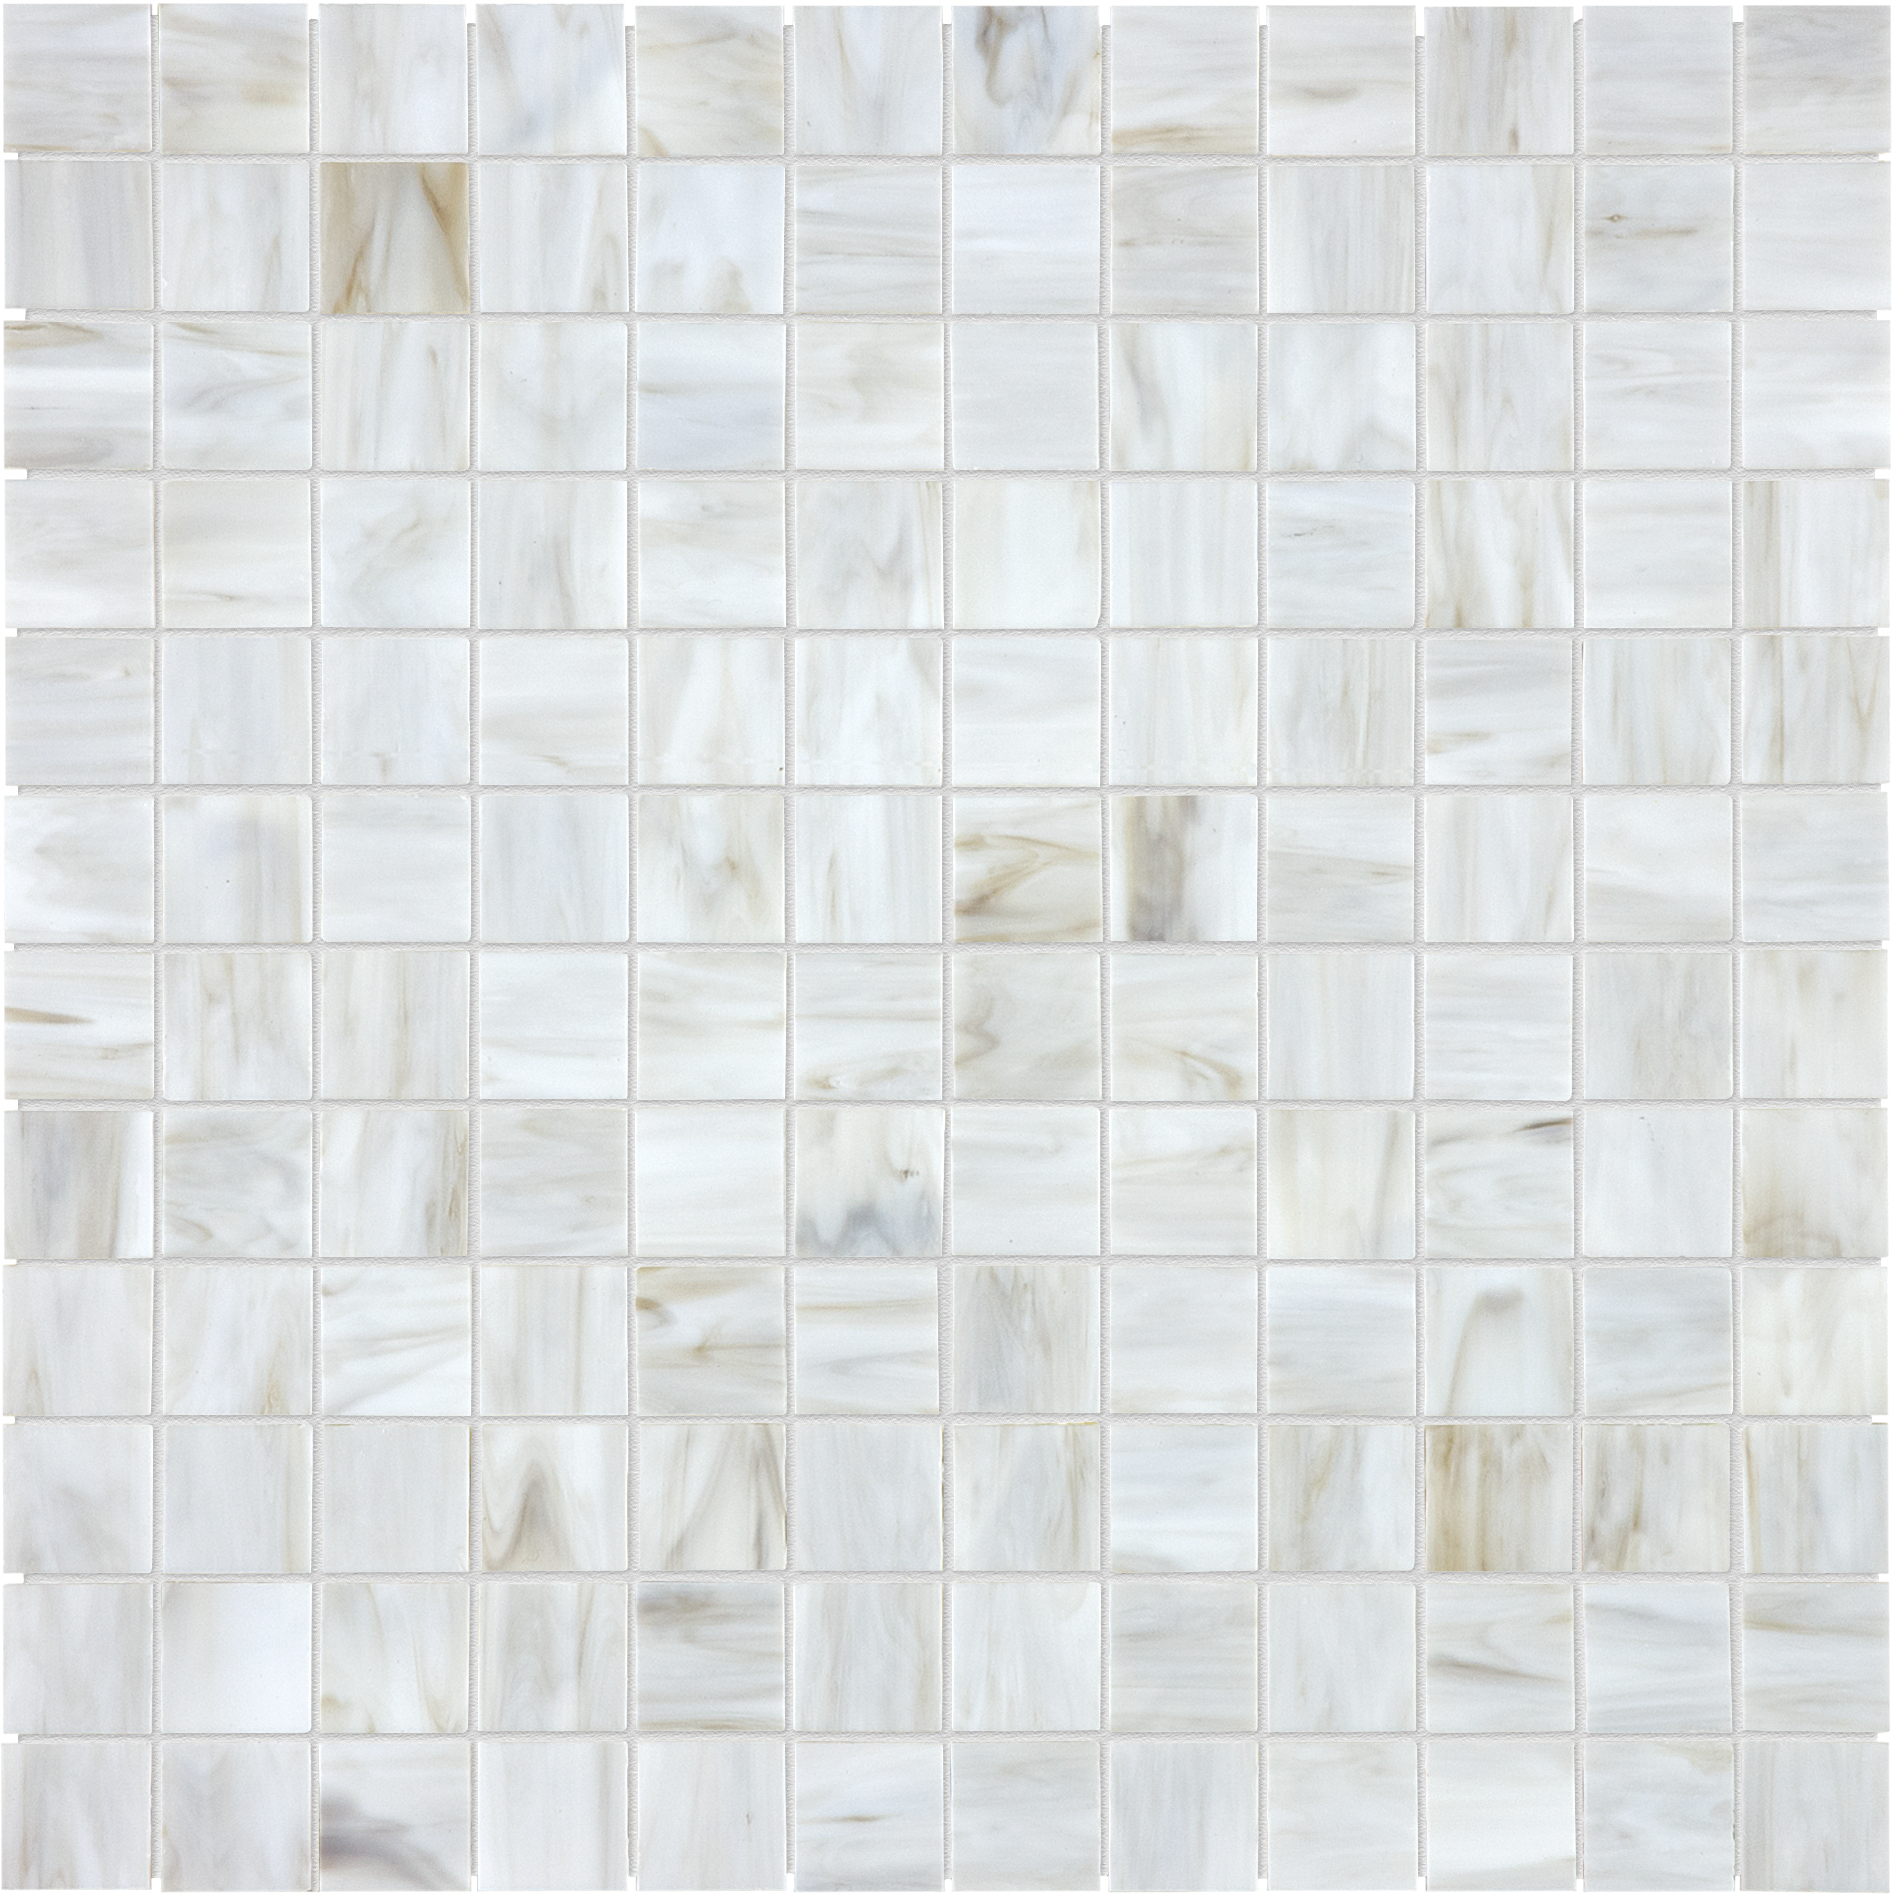 calacatta straight stack 1x1-inch pattern fused glass mosaic from baroque anatolia collection distributed by surface group international glossy finish rounded edge mesh shape